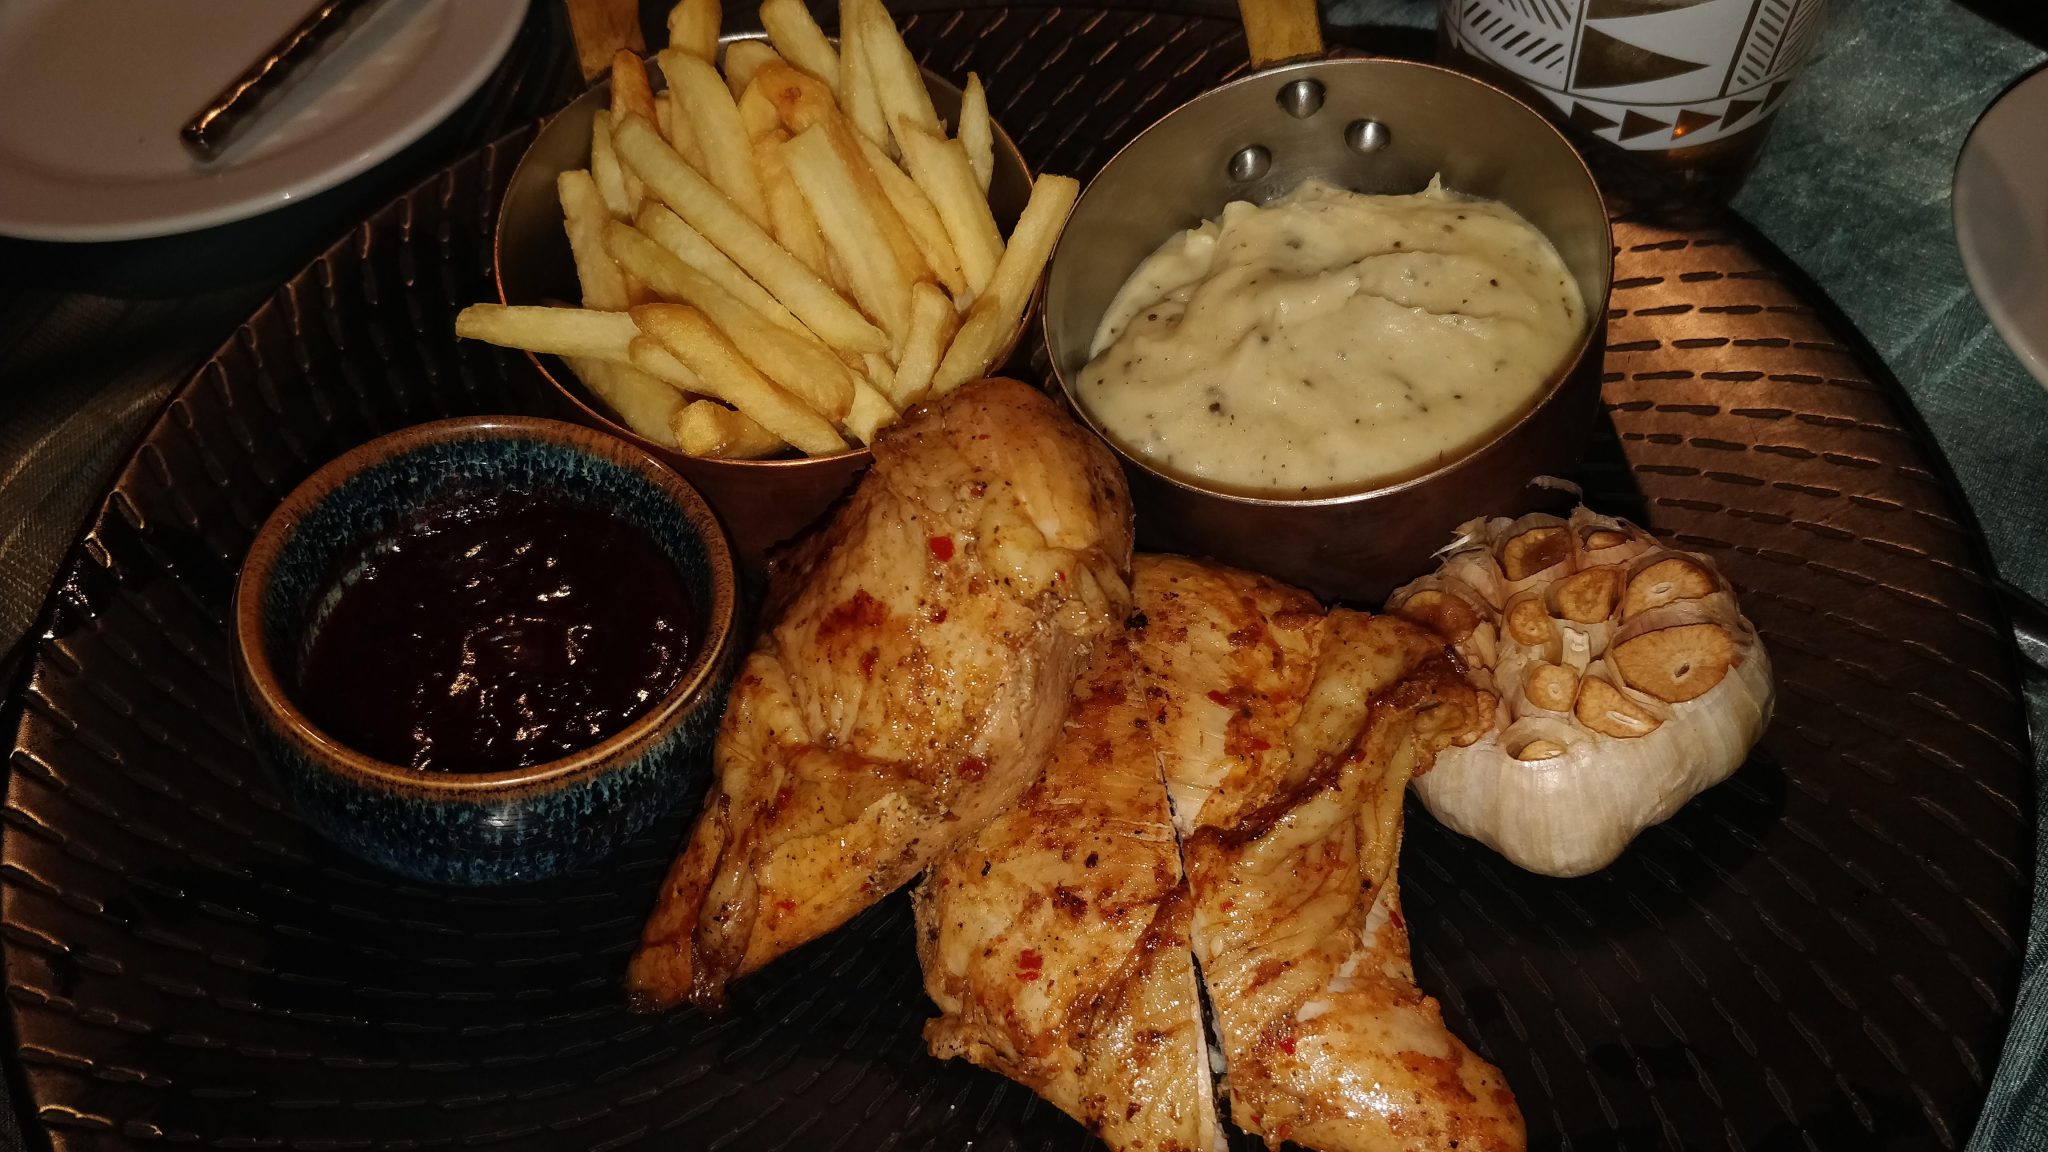 Grilled Chicken with Mashed Potatoes, French Fries and Garlic